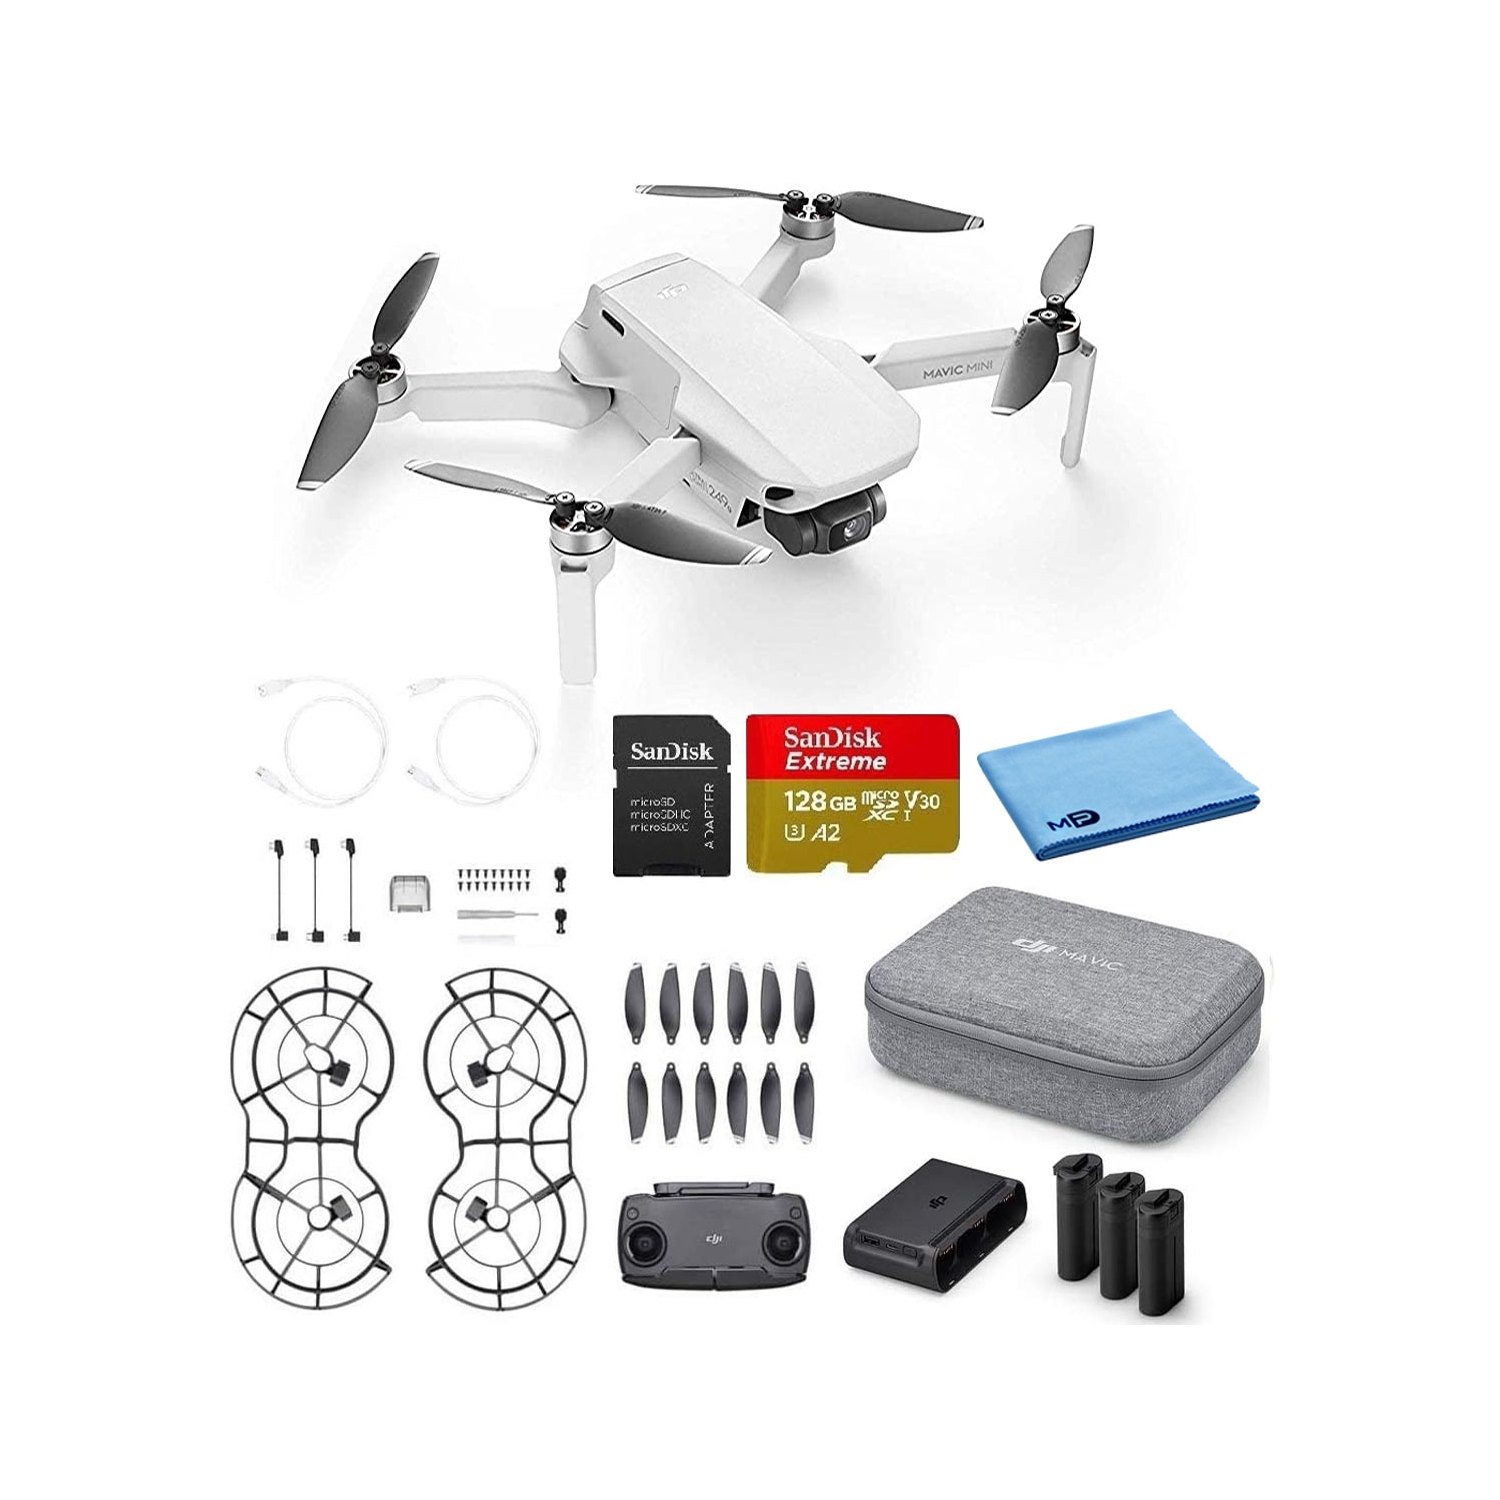 DJI Mavic Mini Fly More Combo Drone FlyCam Quadcopter Bundle with